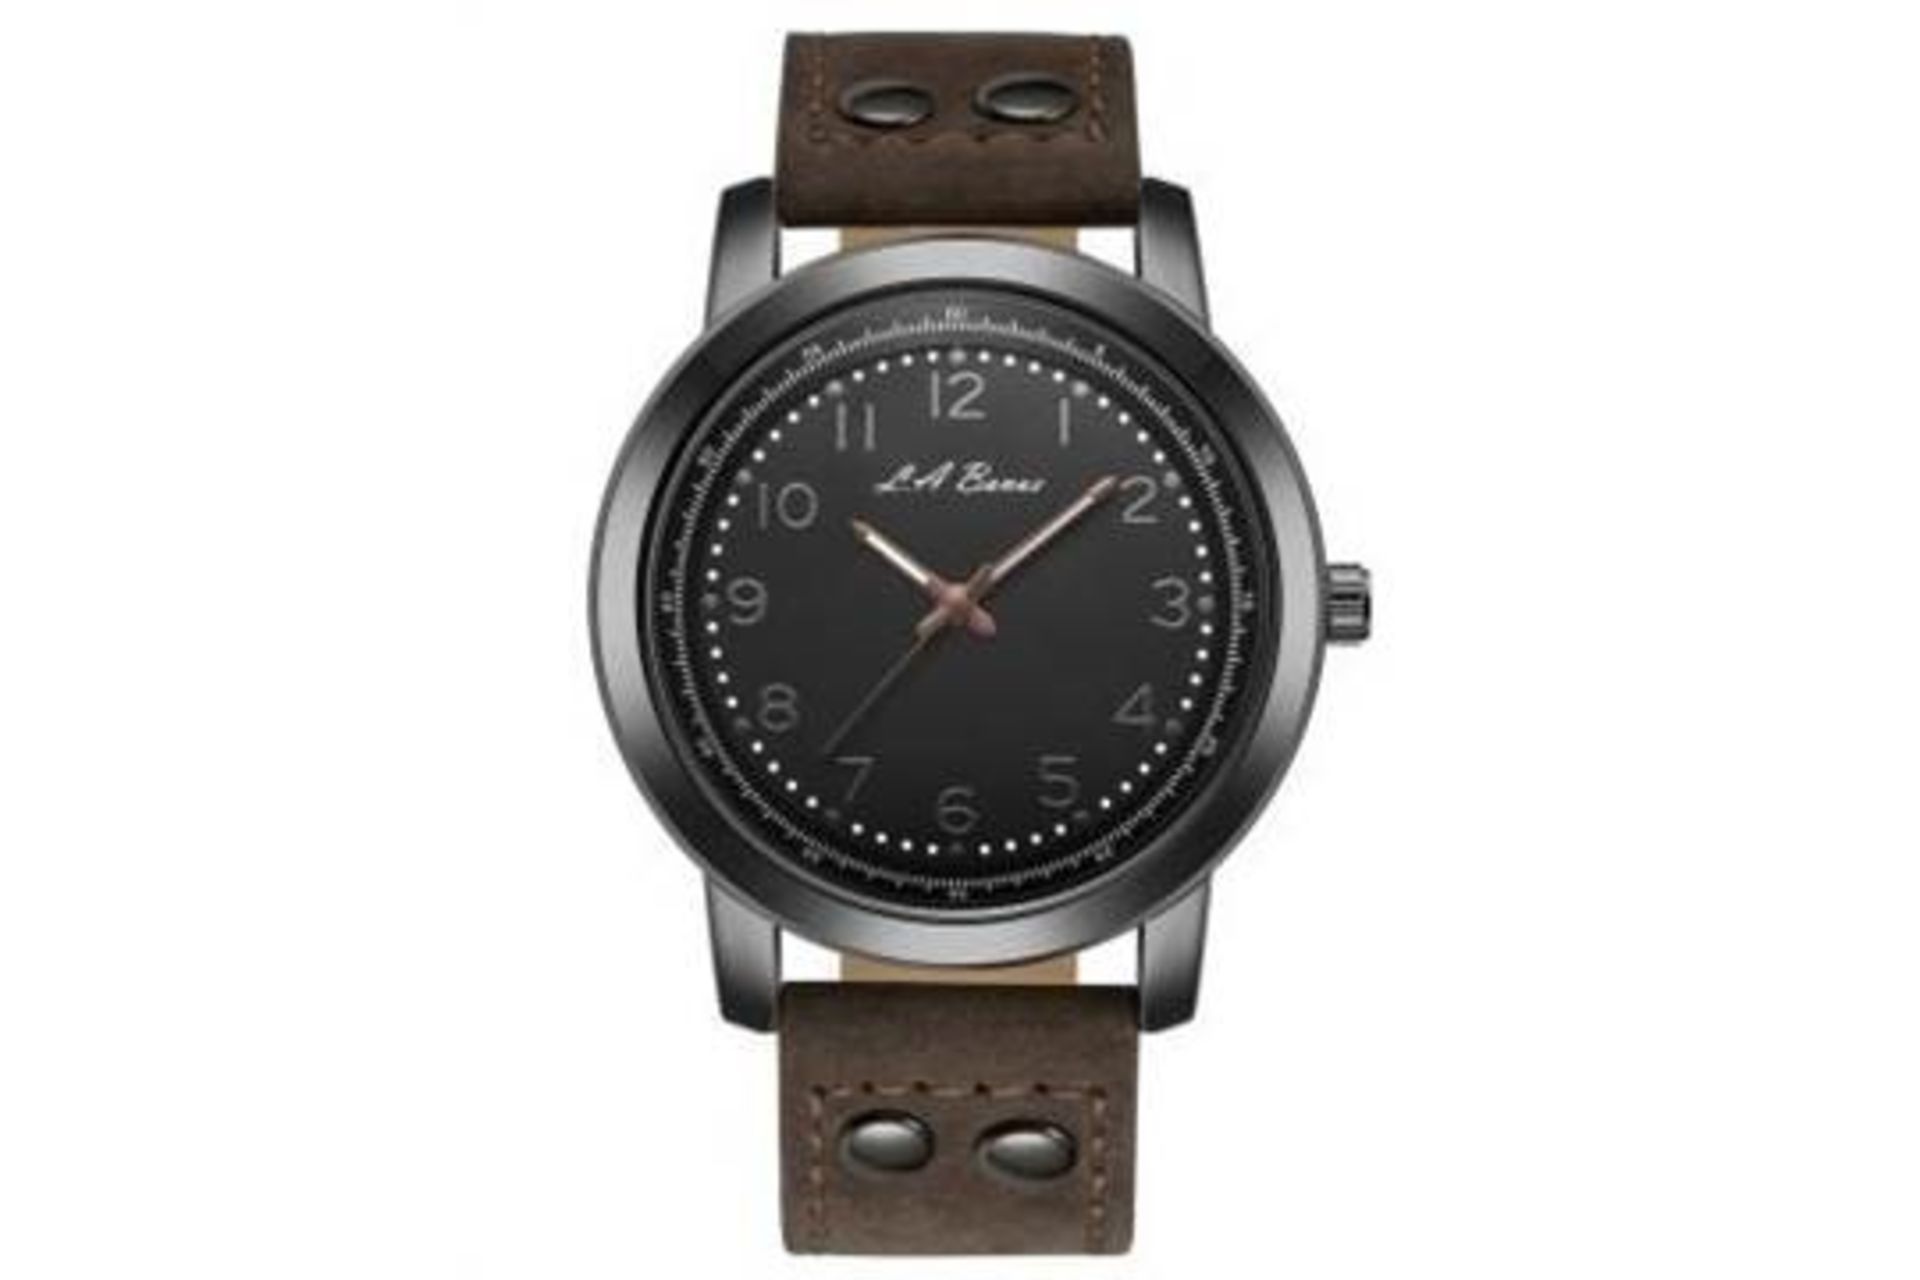 ONE BOXED MEN’S LA BANUS FIELD WATCH, BLACK DIAL, BROWN LEATHER STRAP. RRP £399. VIEWING AVAILABLE